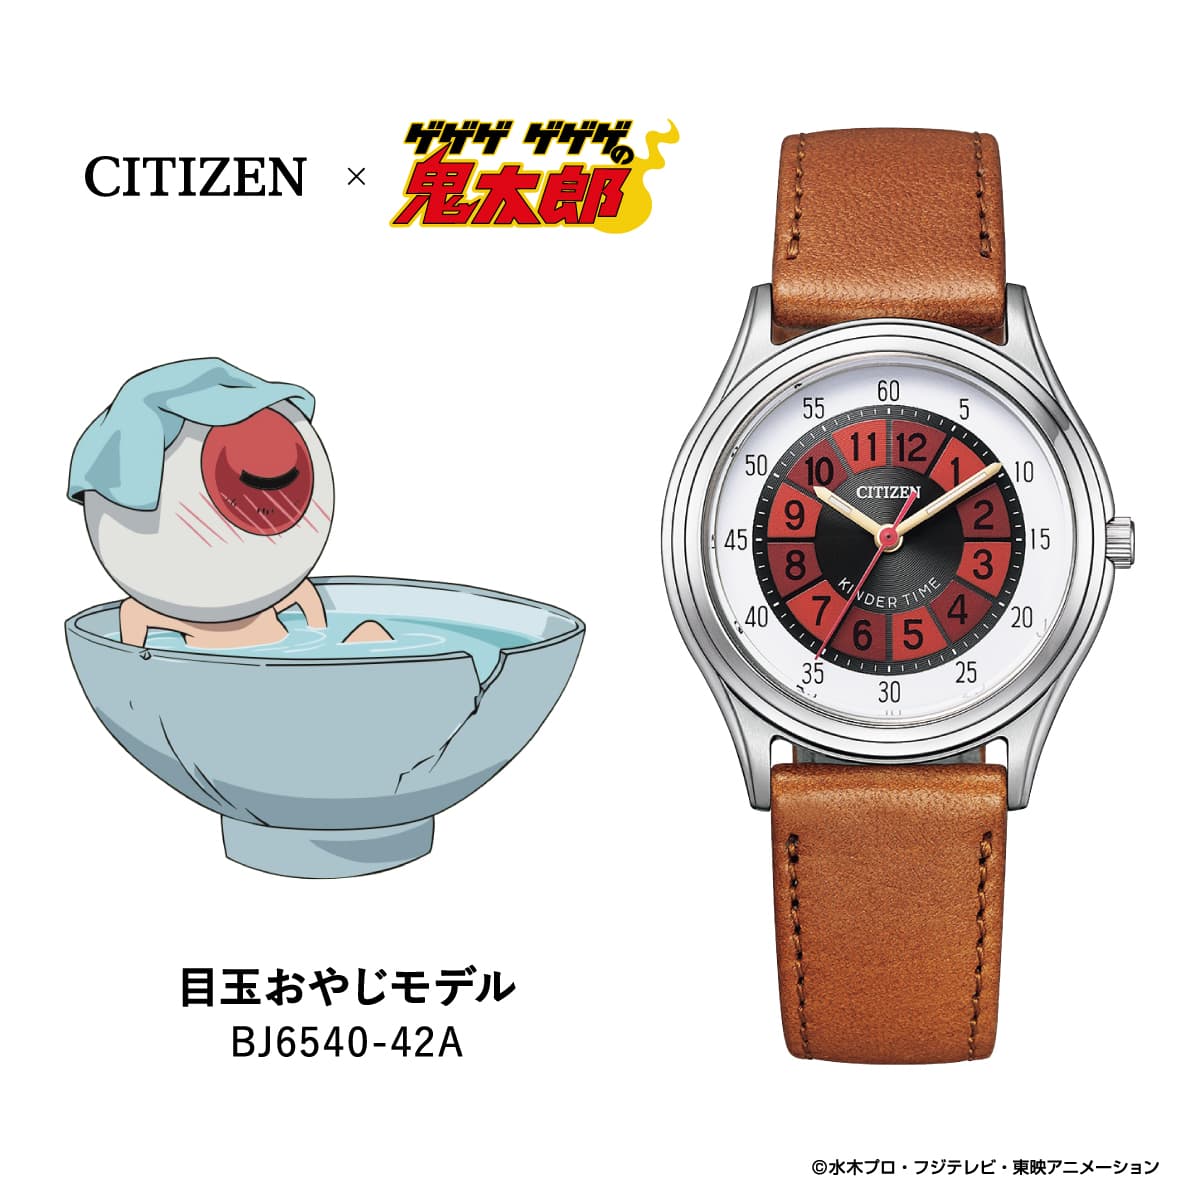 CITIZEN COLLECTION ゲゲゲの鬼太郎コラボ 目玉おやじモデル BJ6540-42A 限定340本